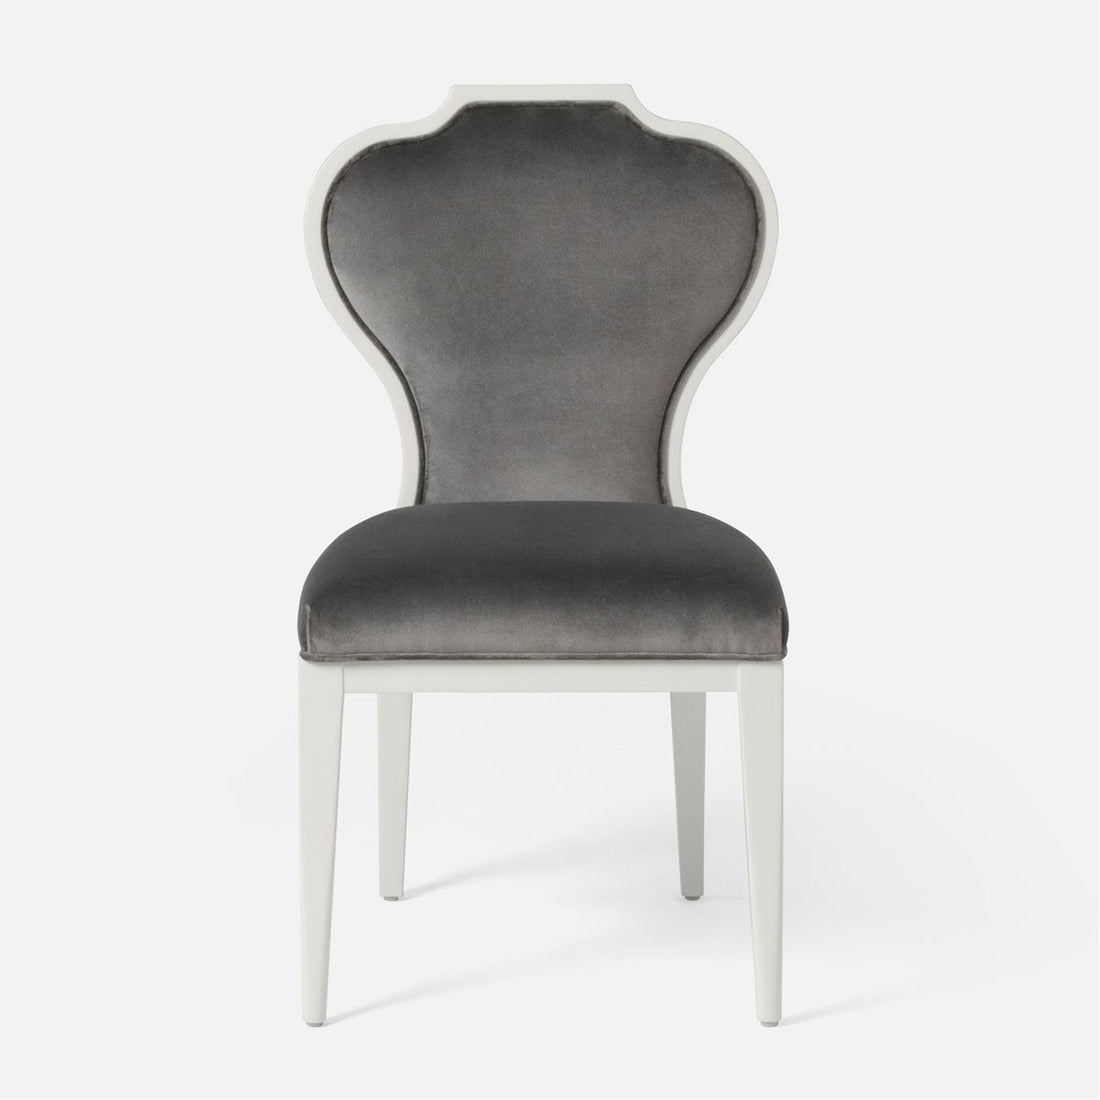 Made Goods Joanna Dining Chair in Brenta Cotton/Jute